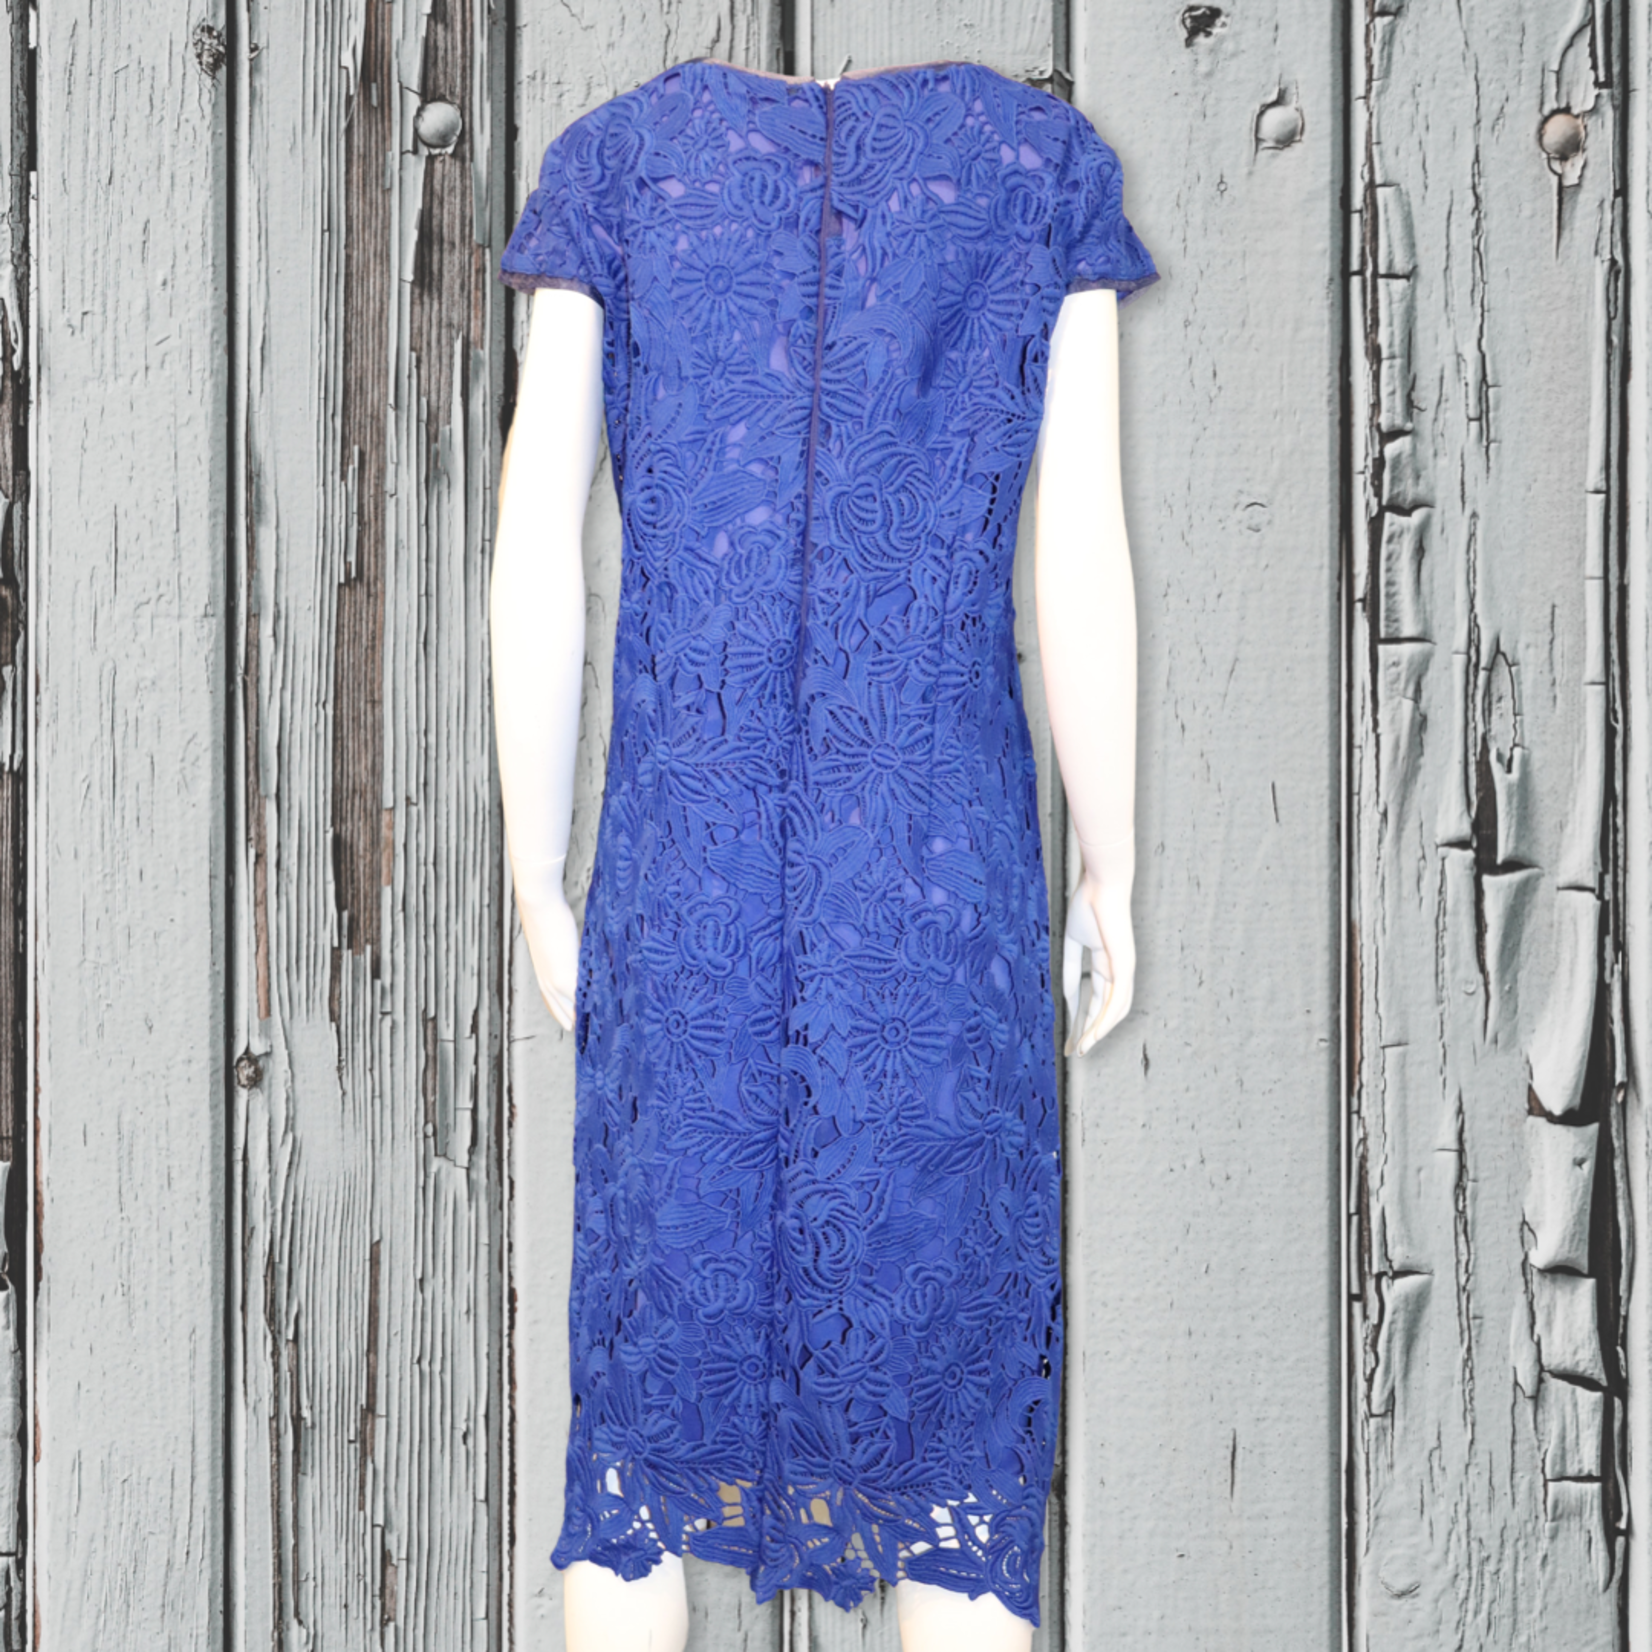 Crystal River Royal Blue Heavy Lace Capped Sleeve Mid Length Dress